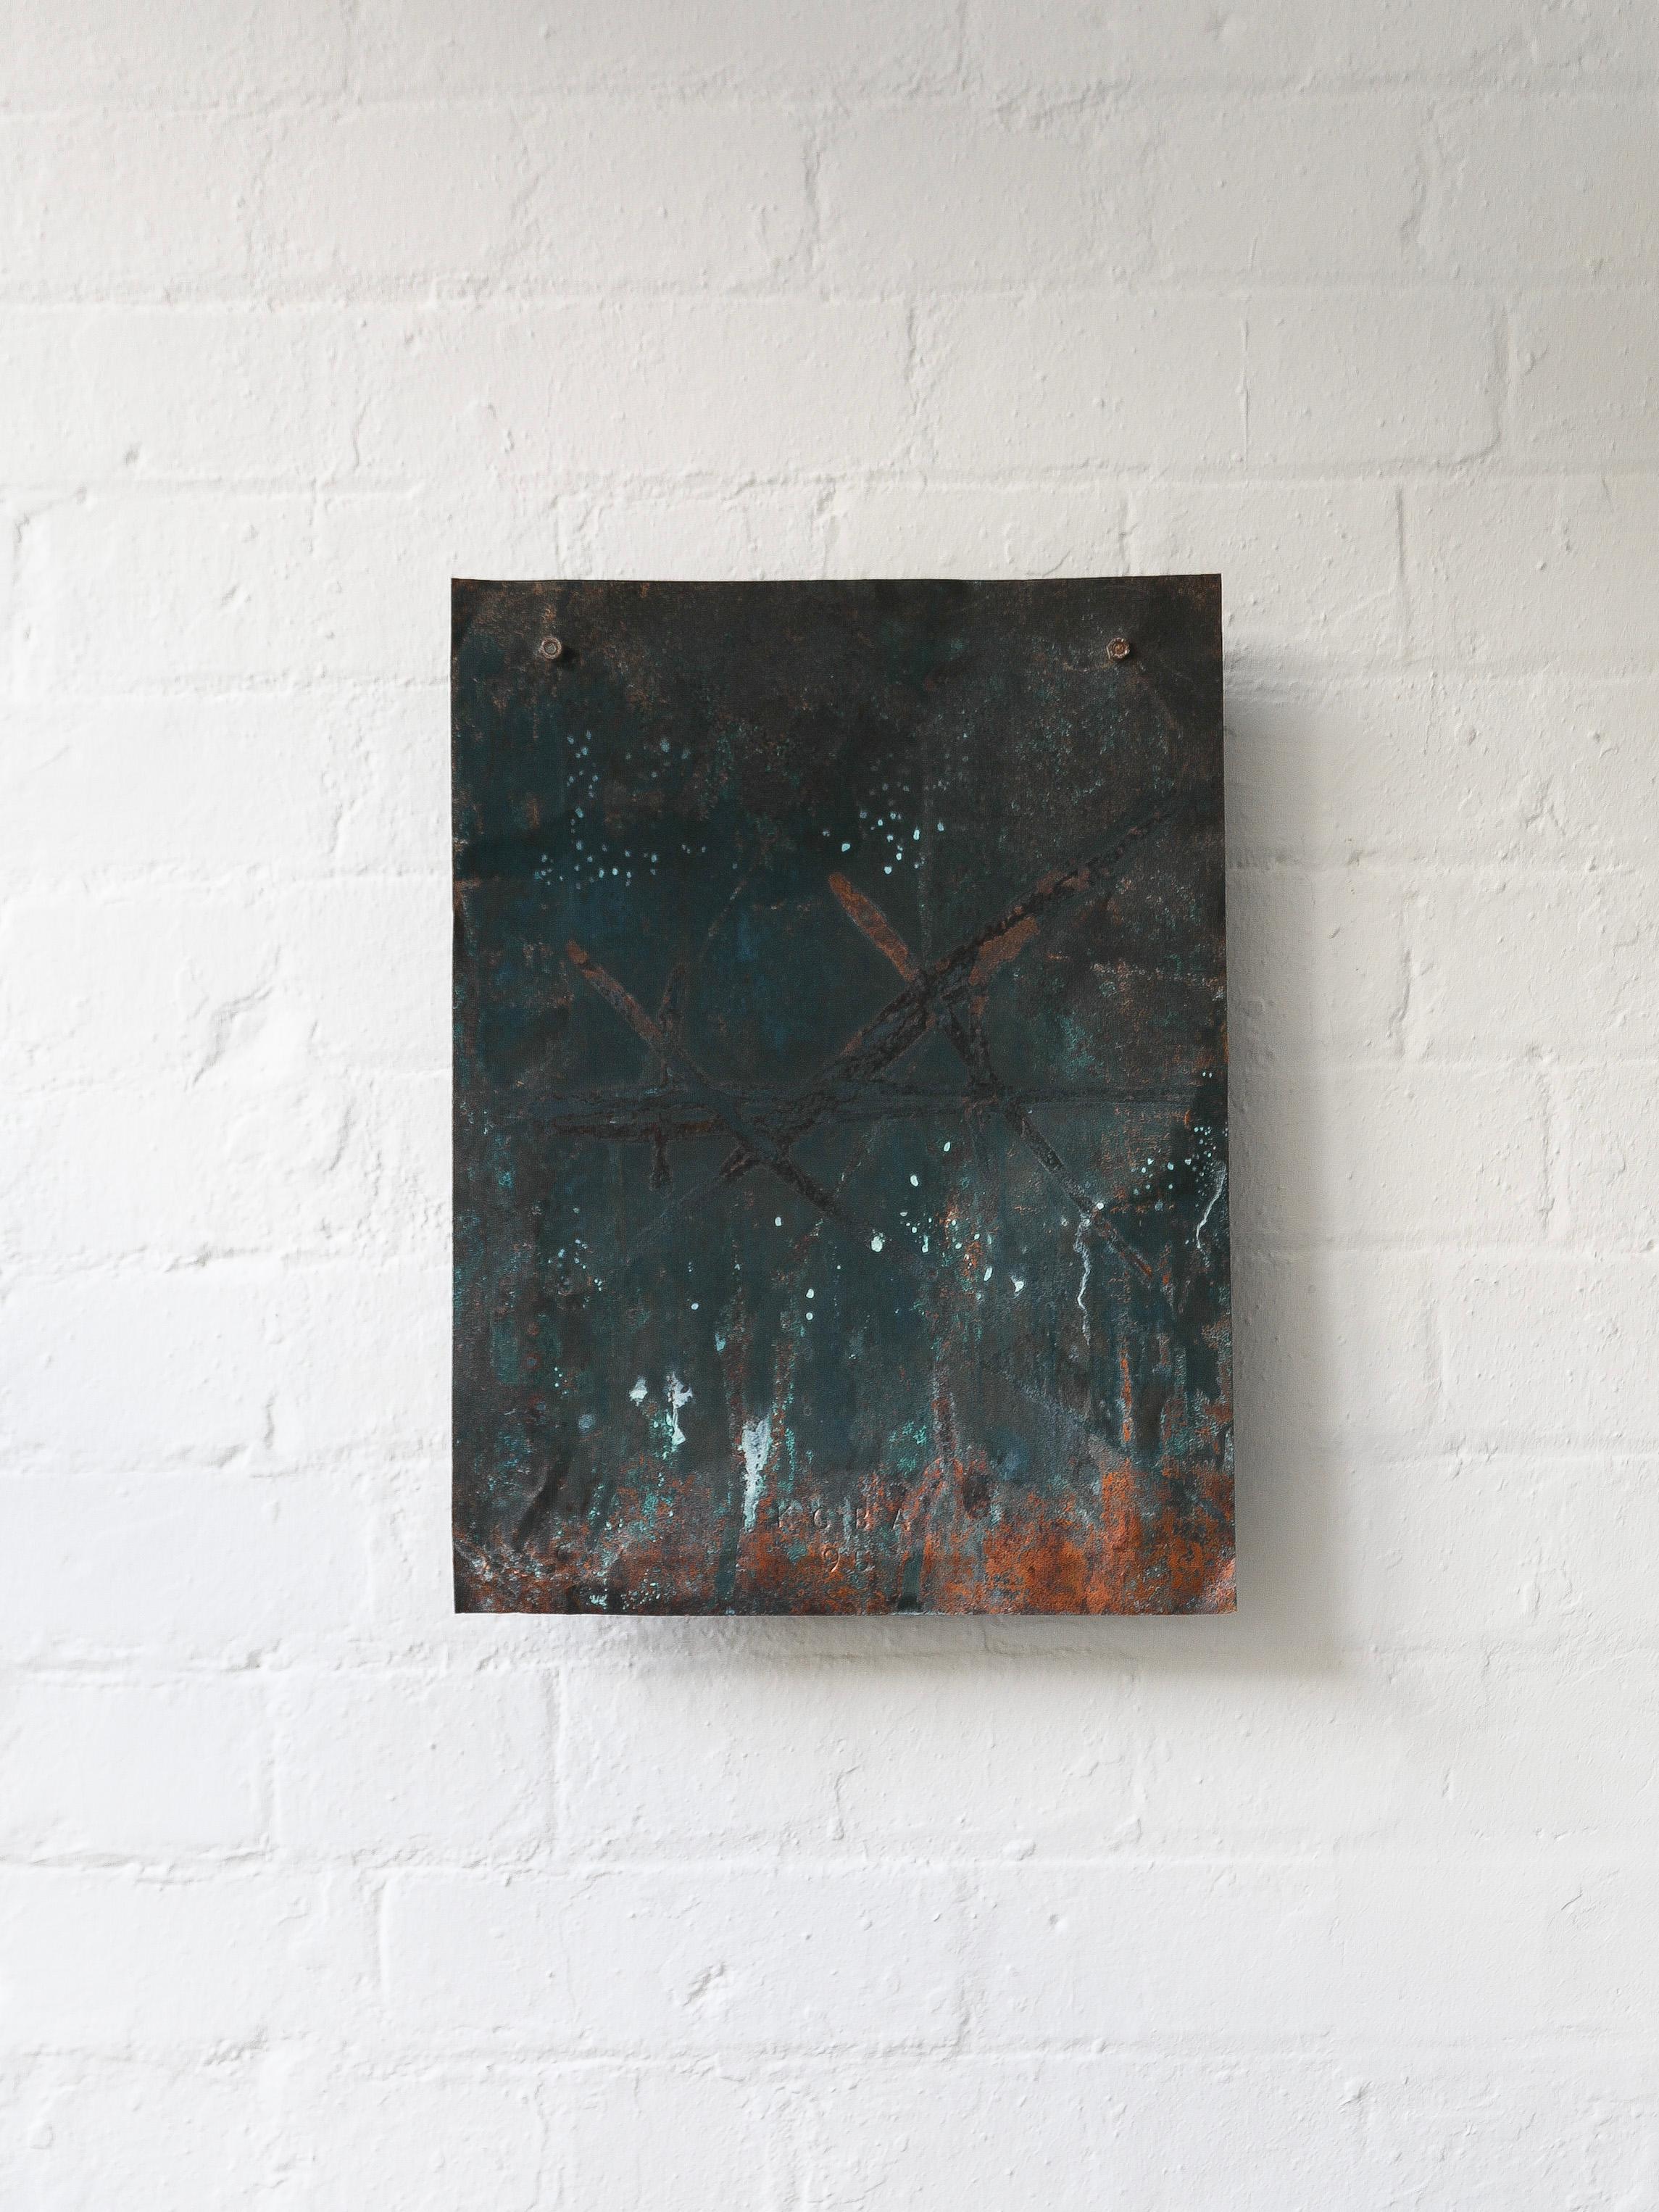 A sculptural copper plate wall relief by Swedish artist Bo Anderson (born 1946). Wonderfully aged with a rich patina. Mounted on a steel tubular frame to be mounted on the wall. Engraved and dated to the lower edge, ‘KG BA 95’.

Artist: Bo